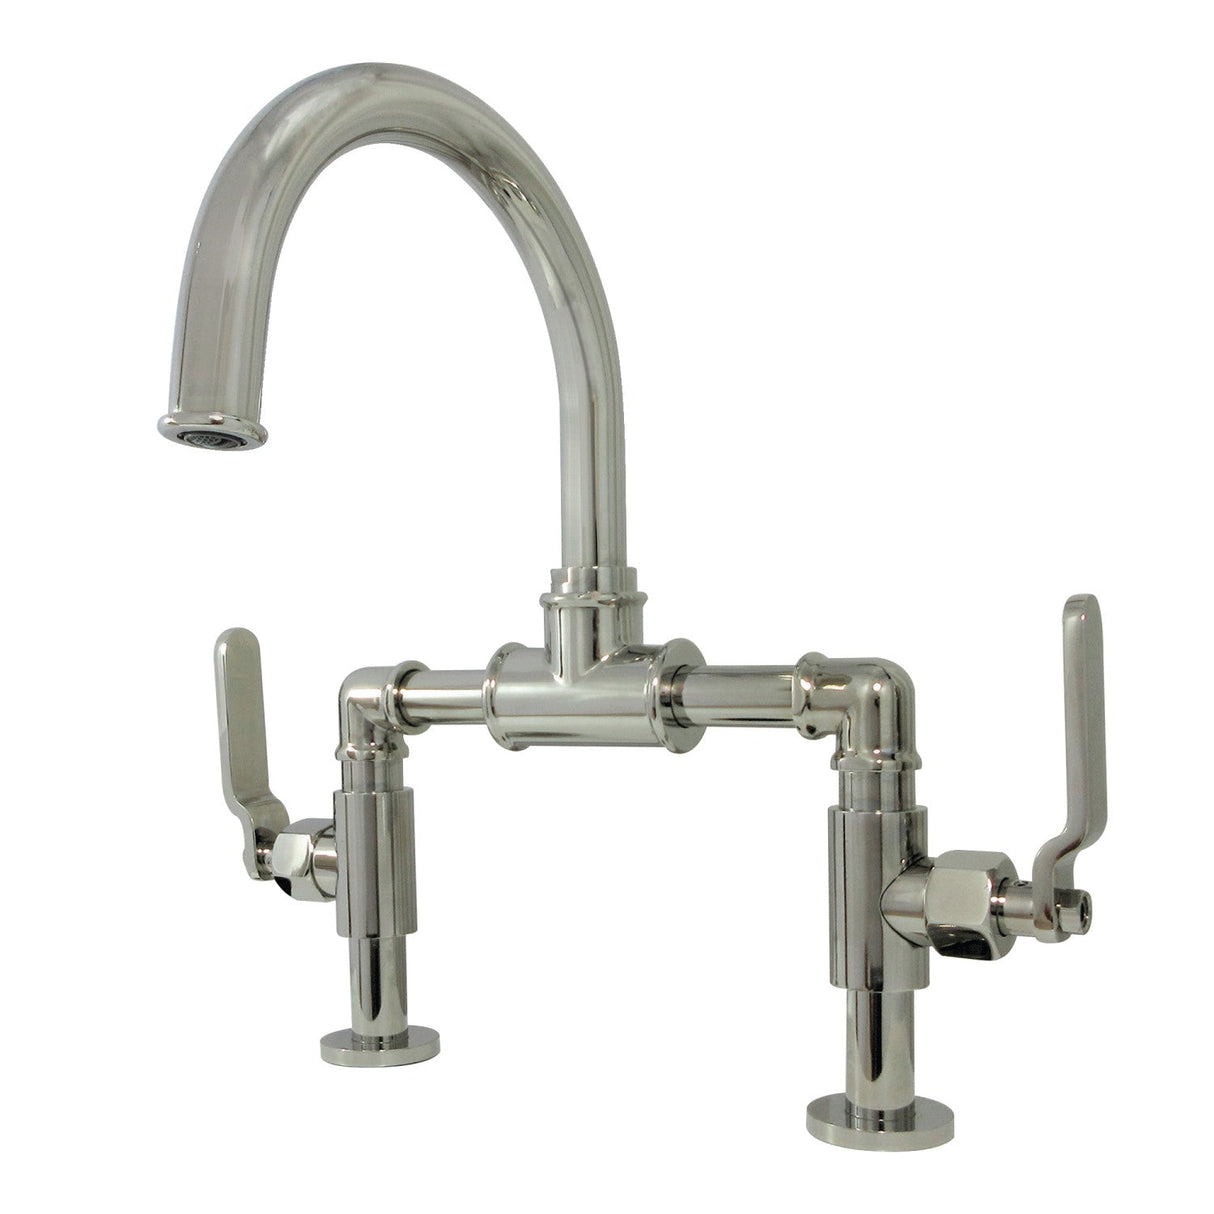 Whitaker KS2176KL Two-Handle 2-Hole Deck Mount Bridge Bathroom Faucet with Pop-Up Drain, Polished Nickel